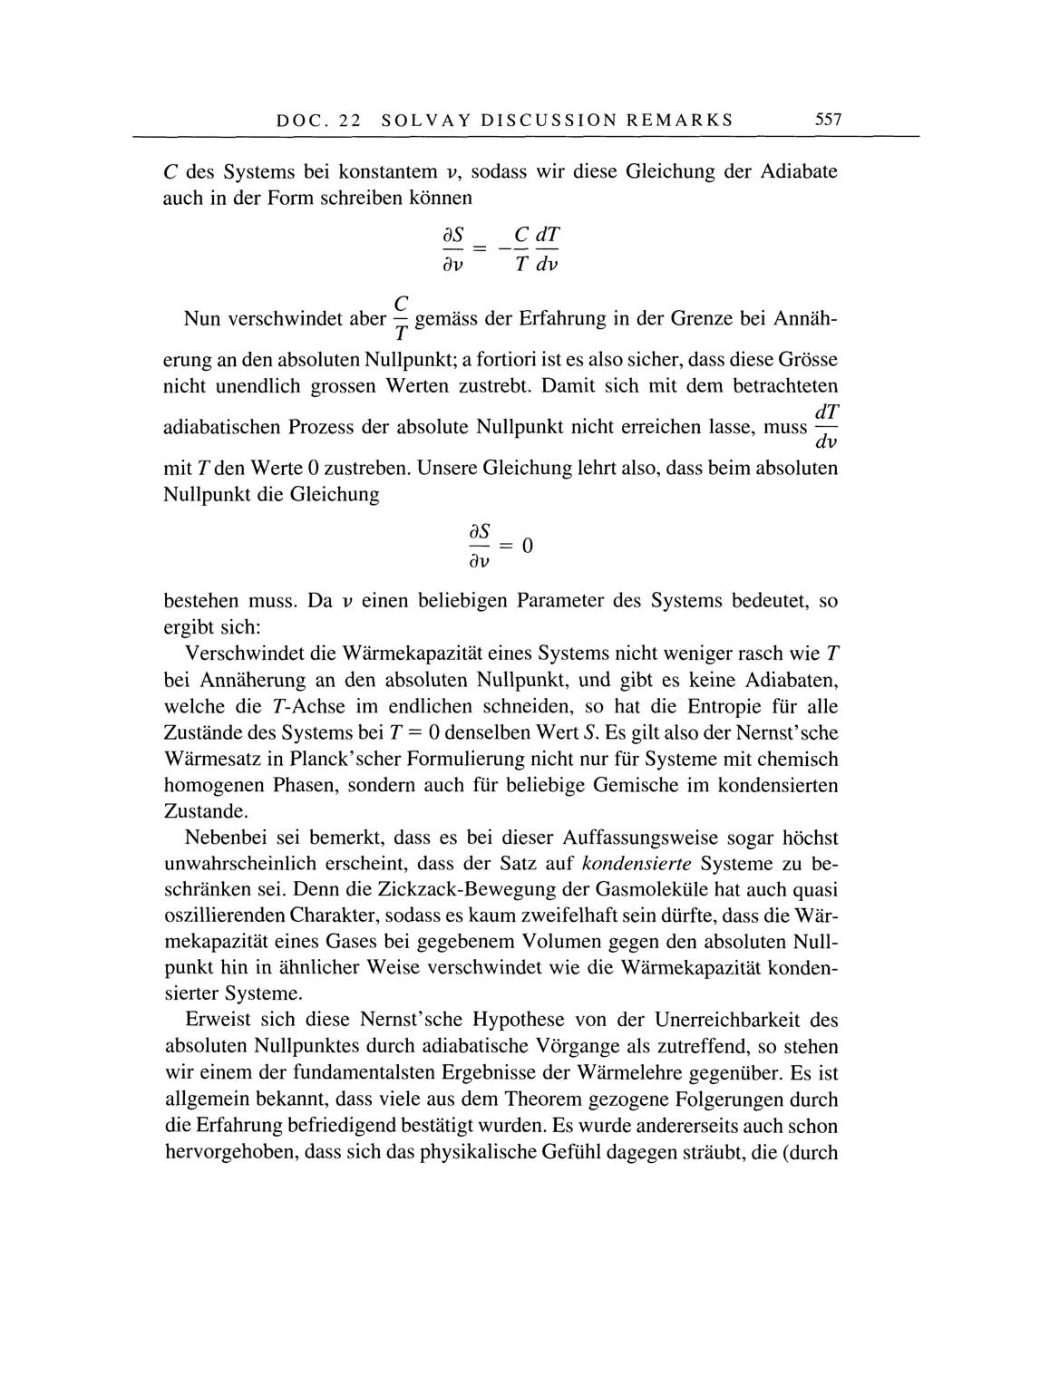 Volume 4: The Swiss Years: Writings 1912-1914 page 557